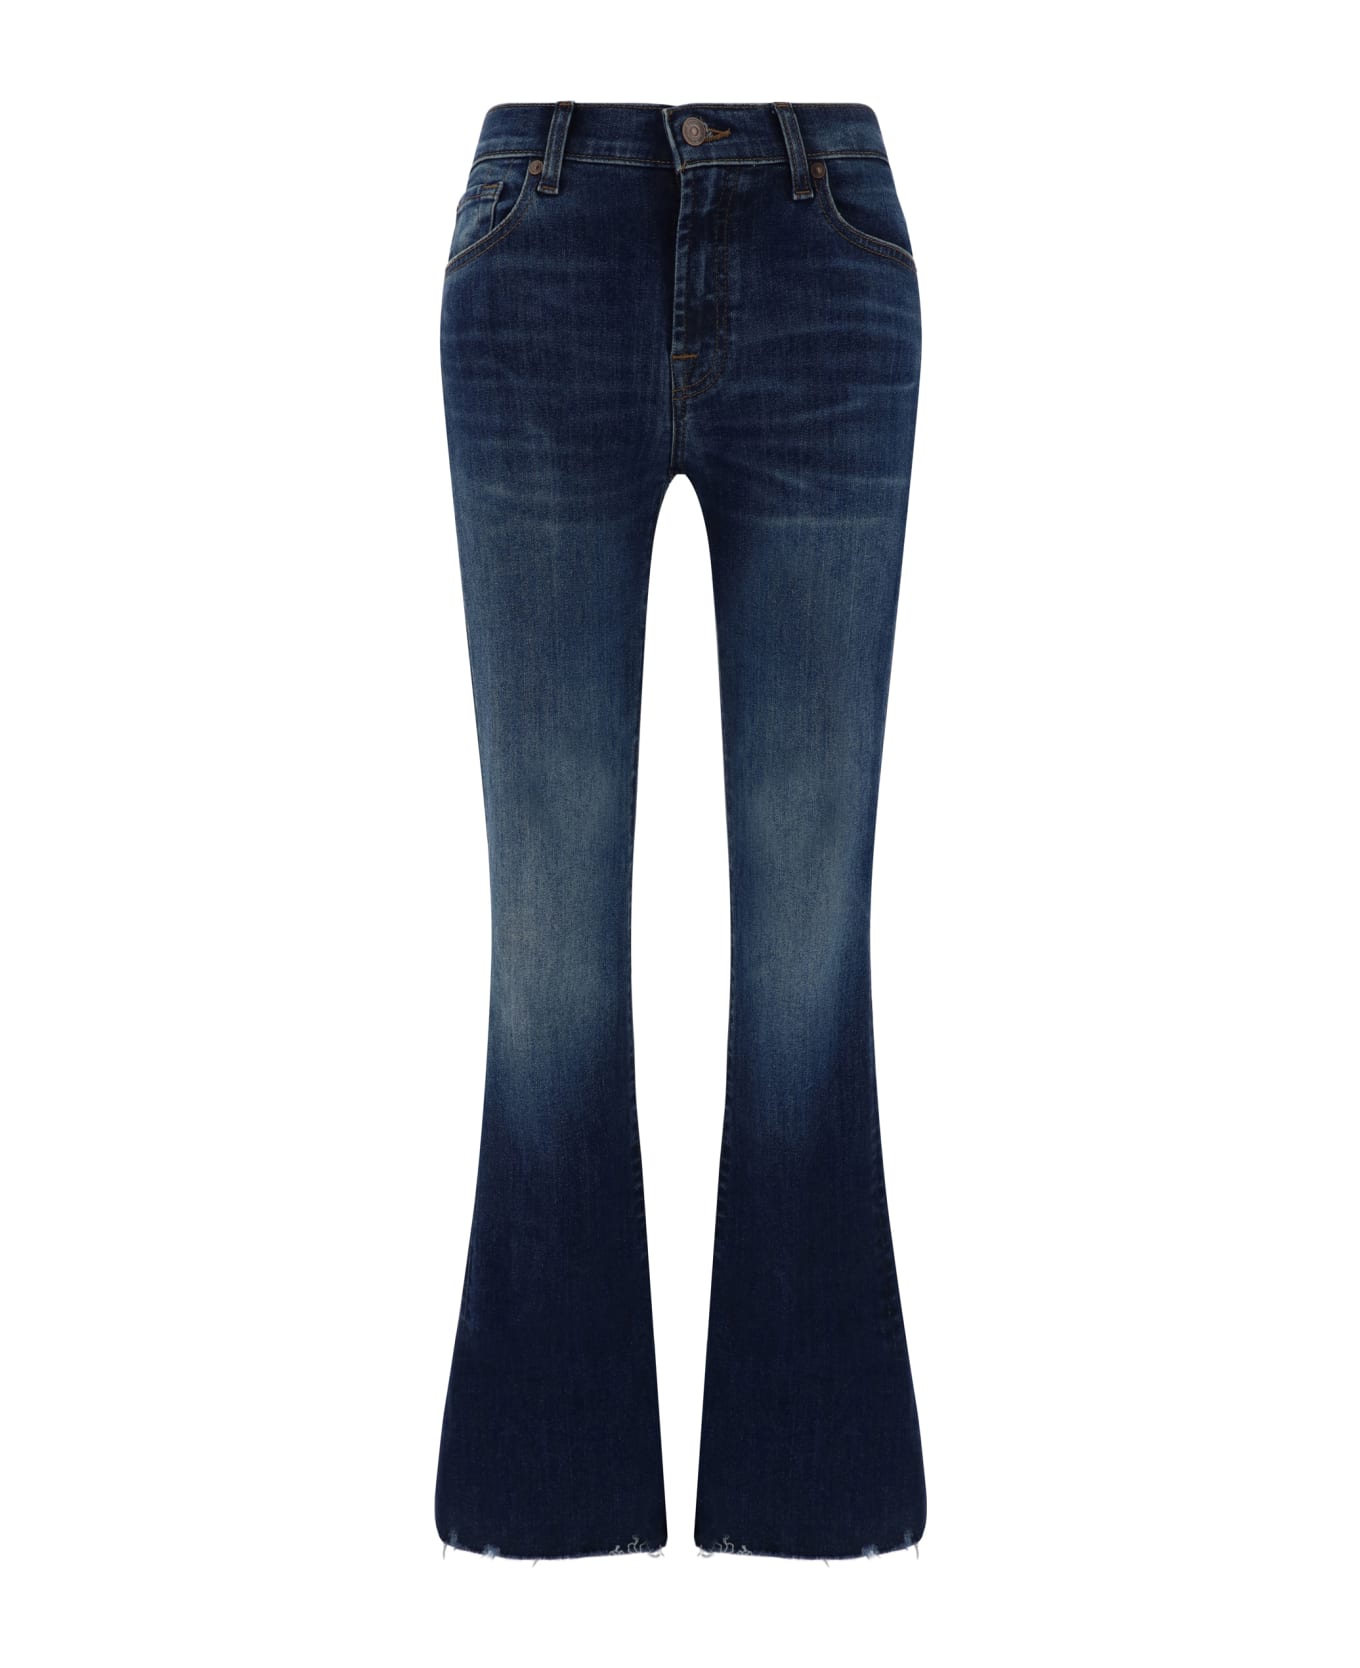 7 For All Mankind Jeans - Dark Blue